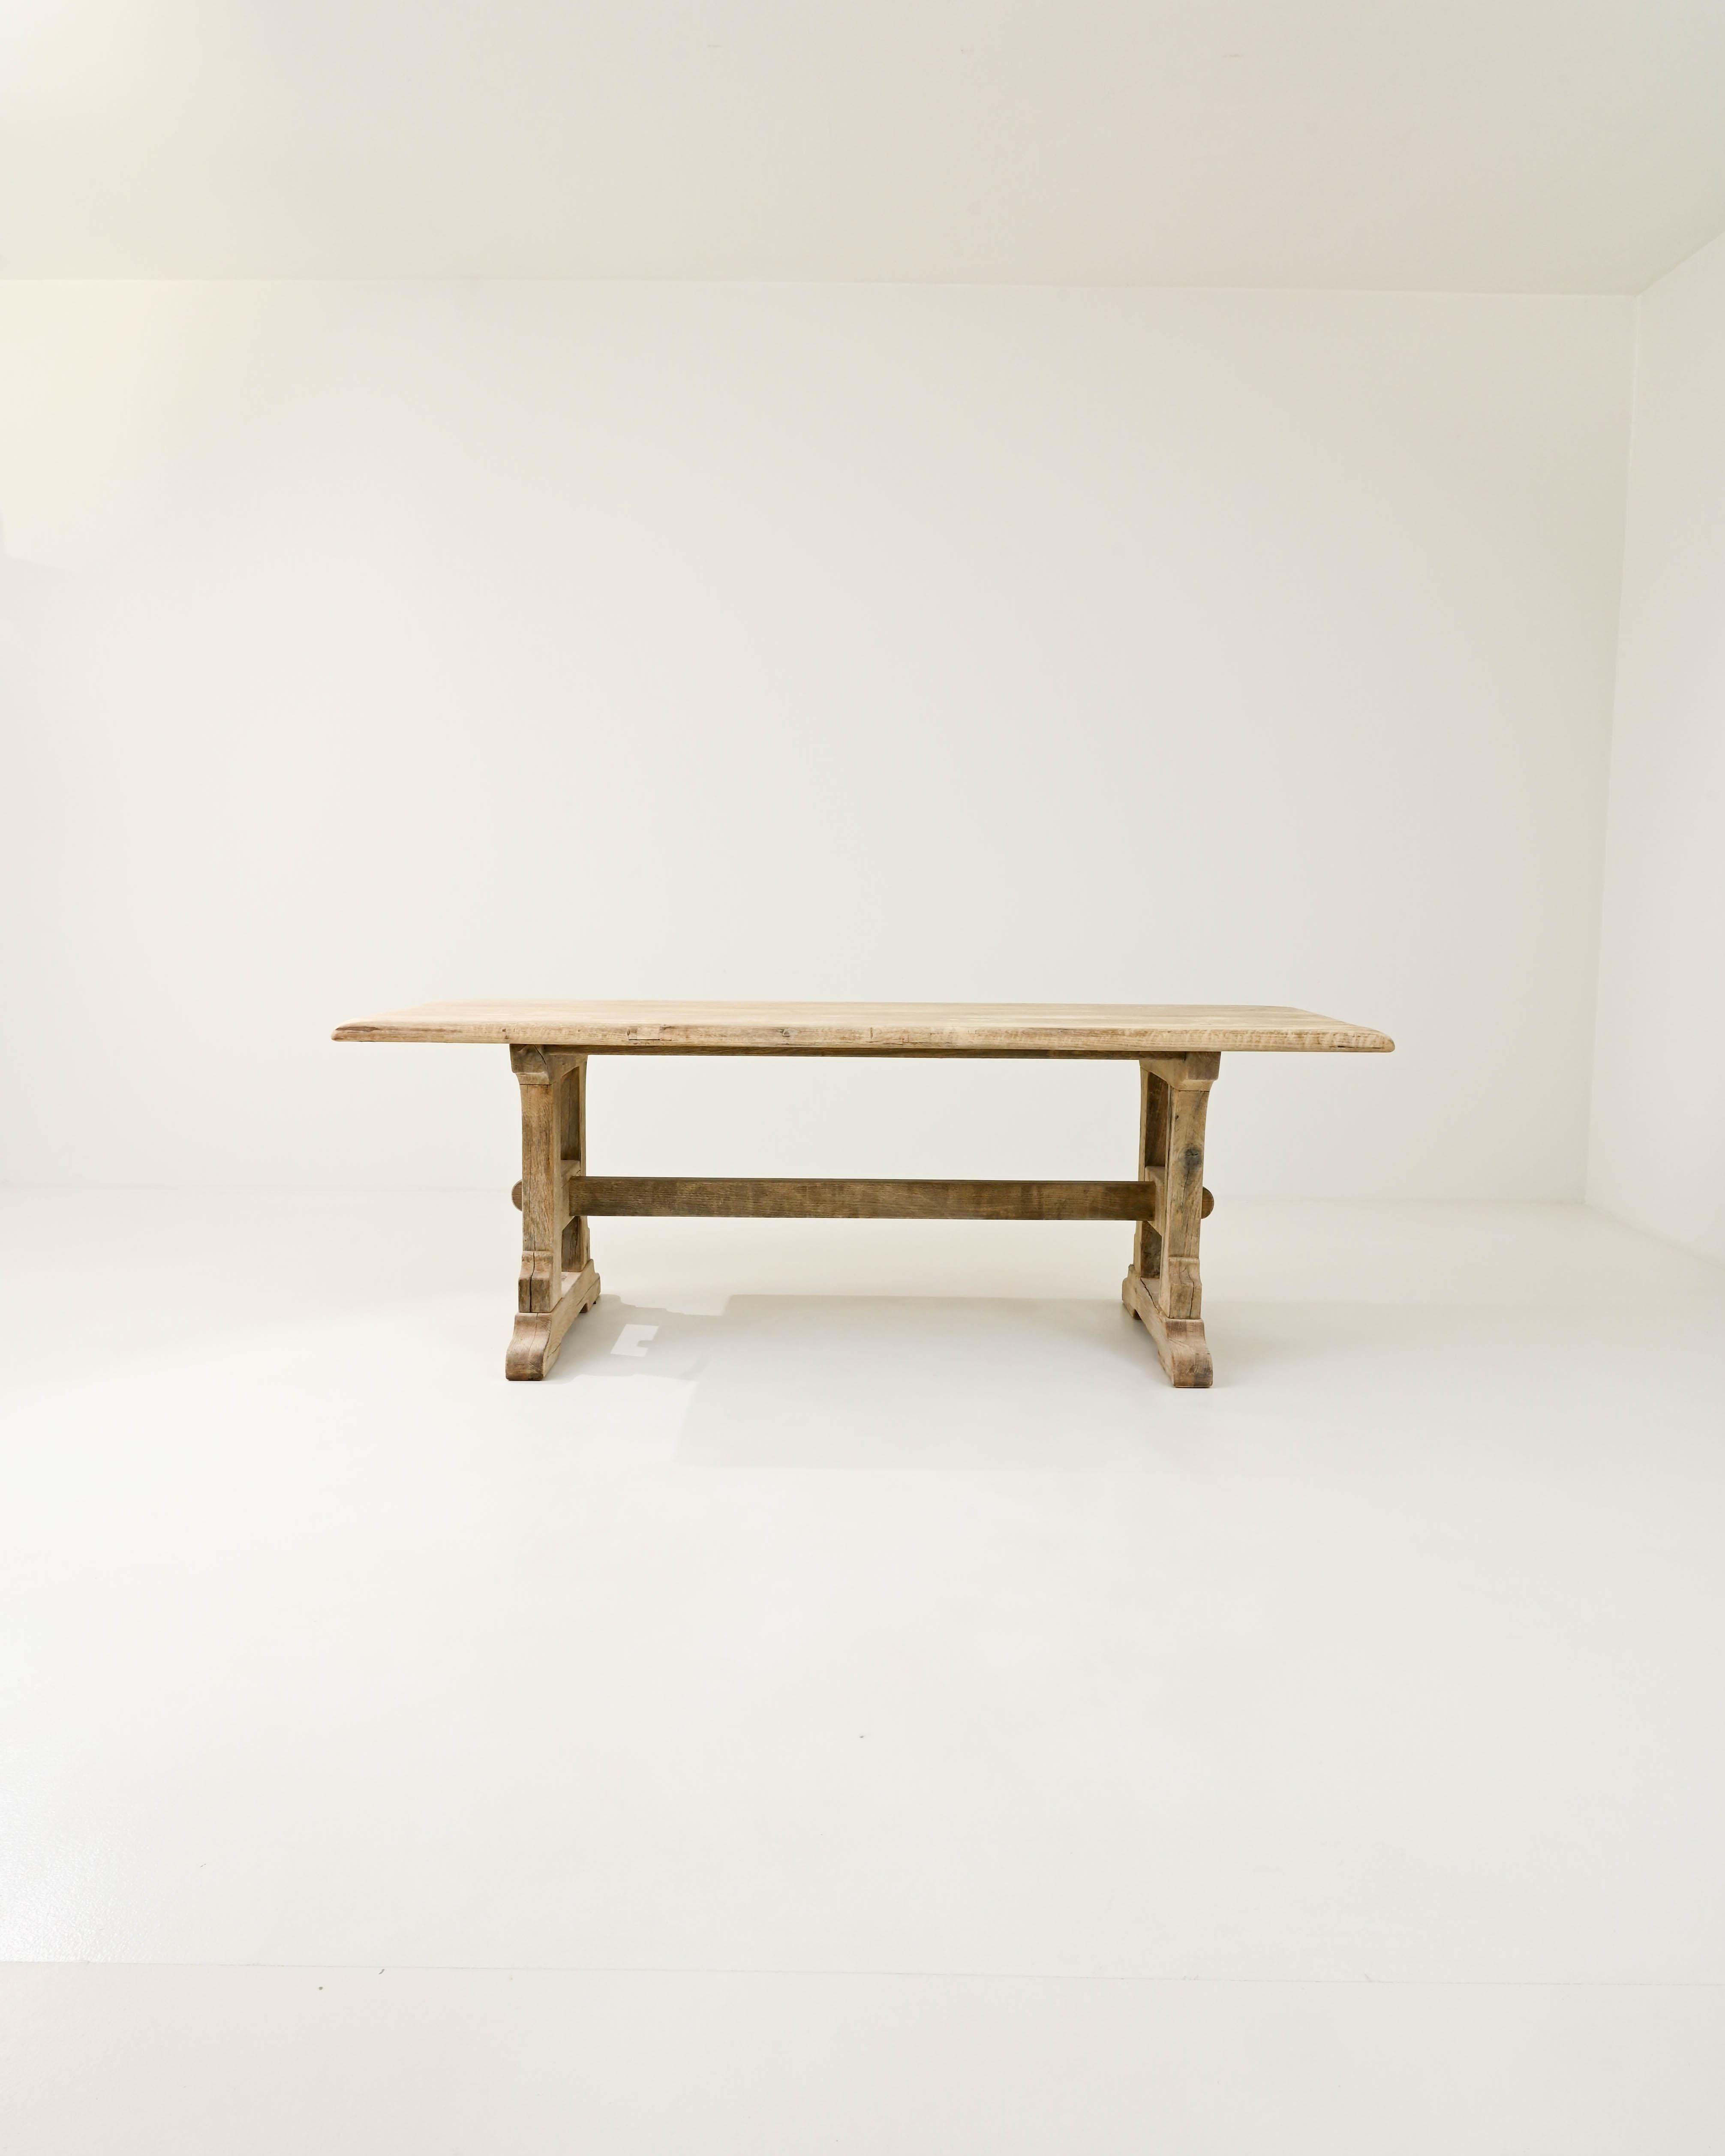 This vintage oak dining table offers a traditional design, beautifully crafted. Hand-built in Belgium in the 20th century, the rectangular tabletop sits atop a trestle base. The simple country silhouette is subtly embellished by the softly carved